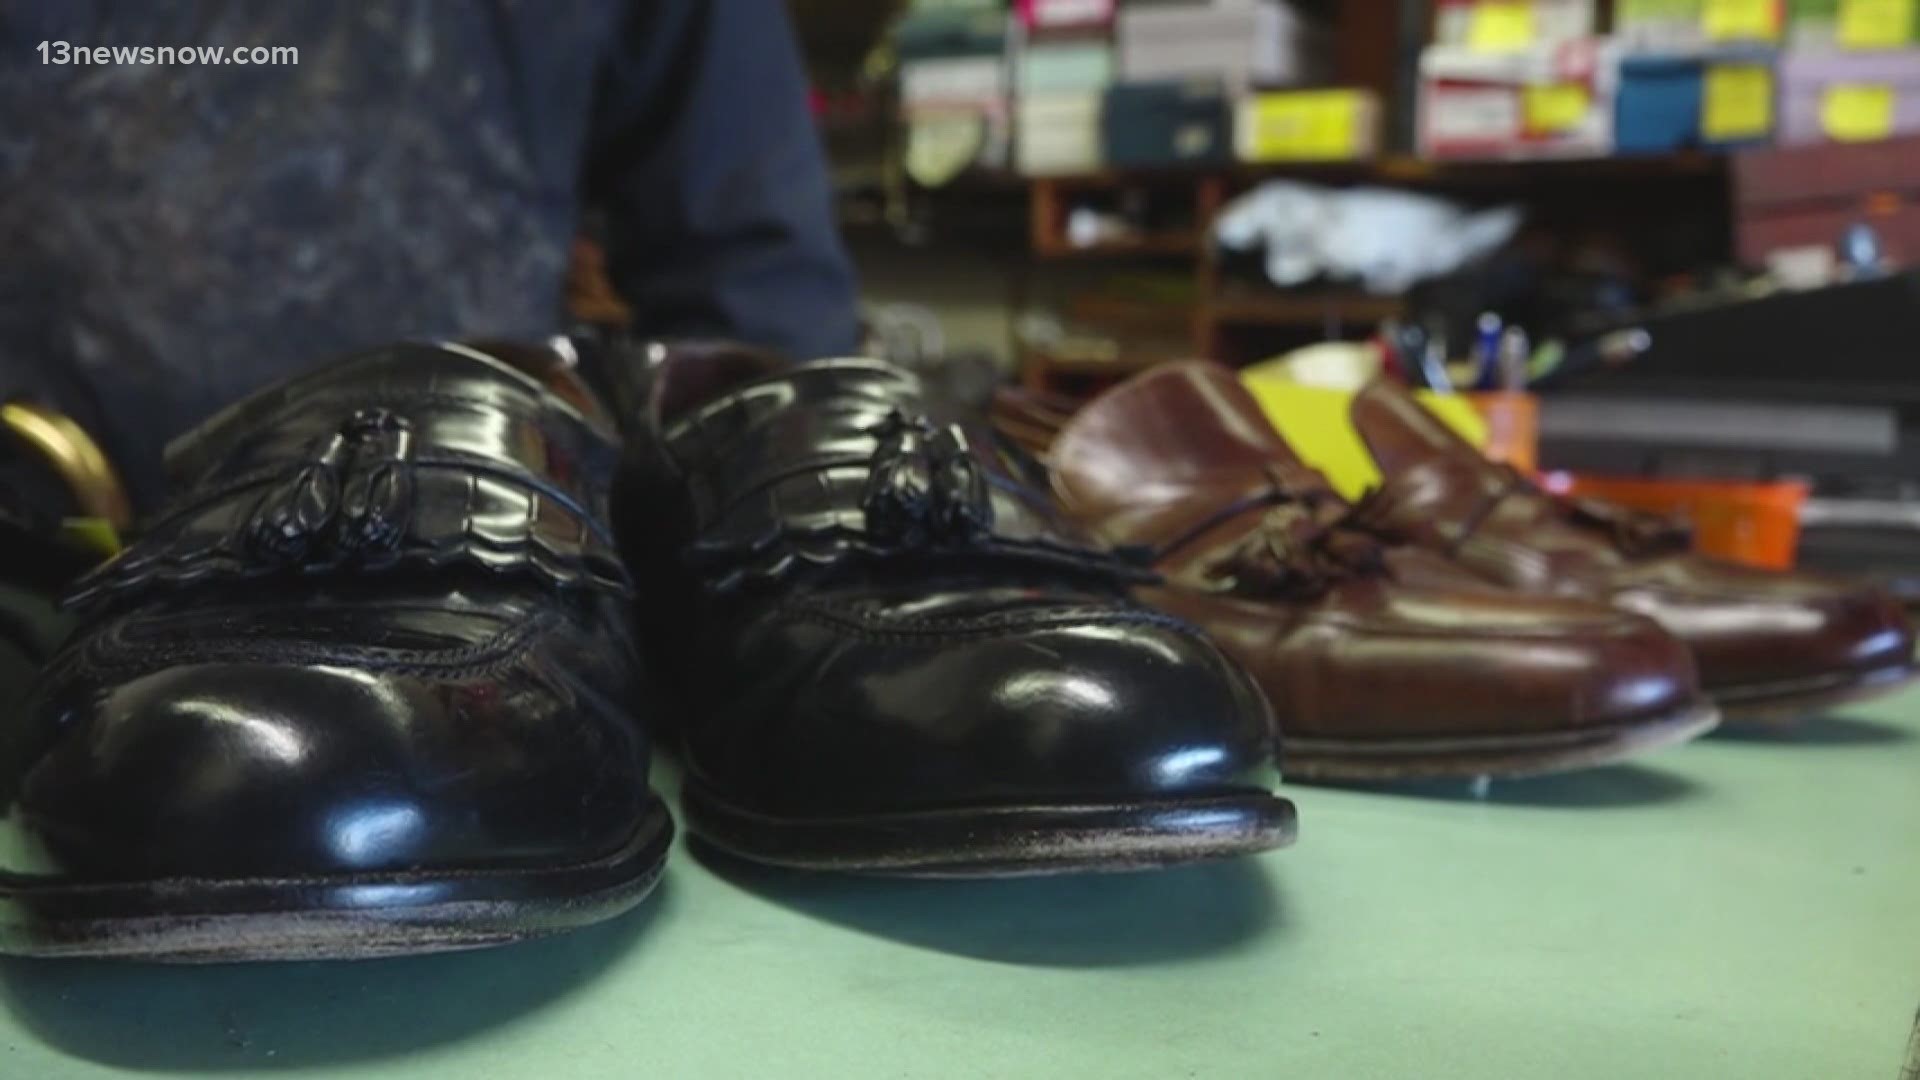 13News Now Anne Sparaco share how a loyal customer base has helped Alex's Shoe Shop thrive in business even during a pandemic.